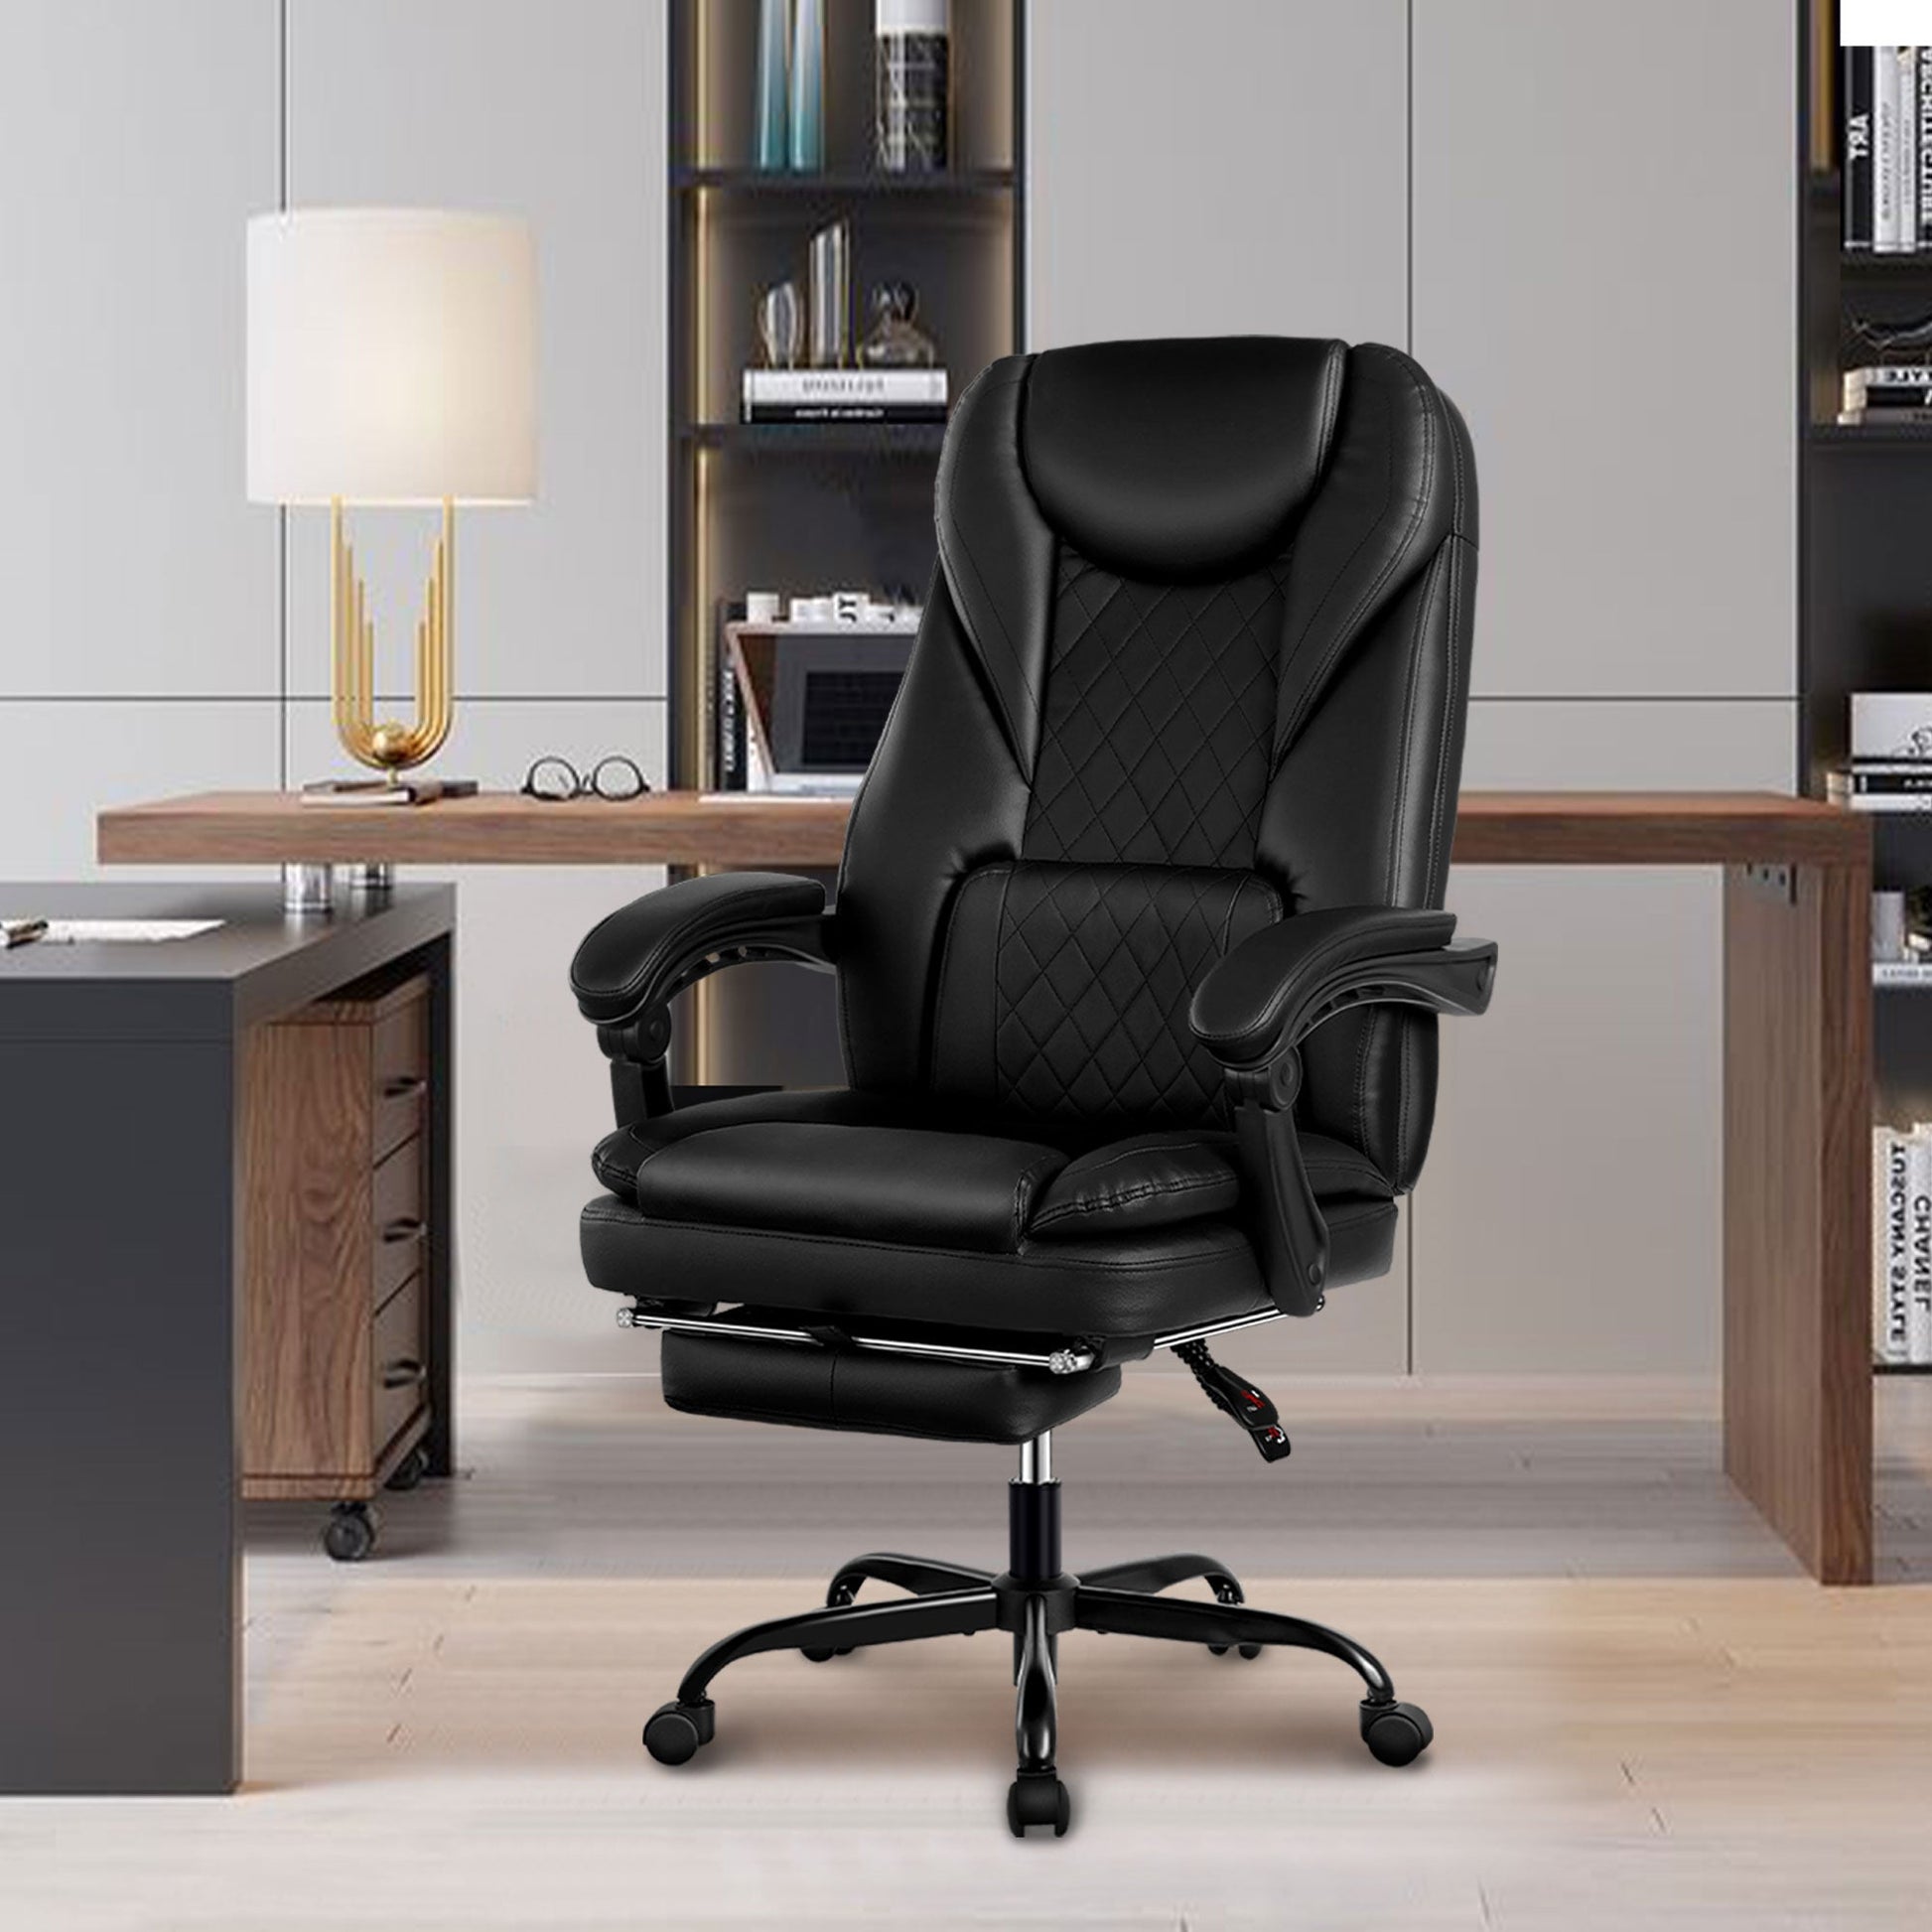 Big and Tall Executive Office Chair With Foot Rest